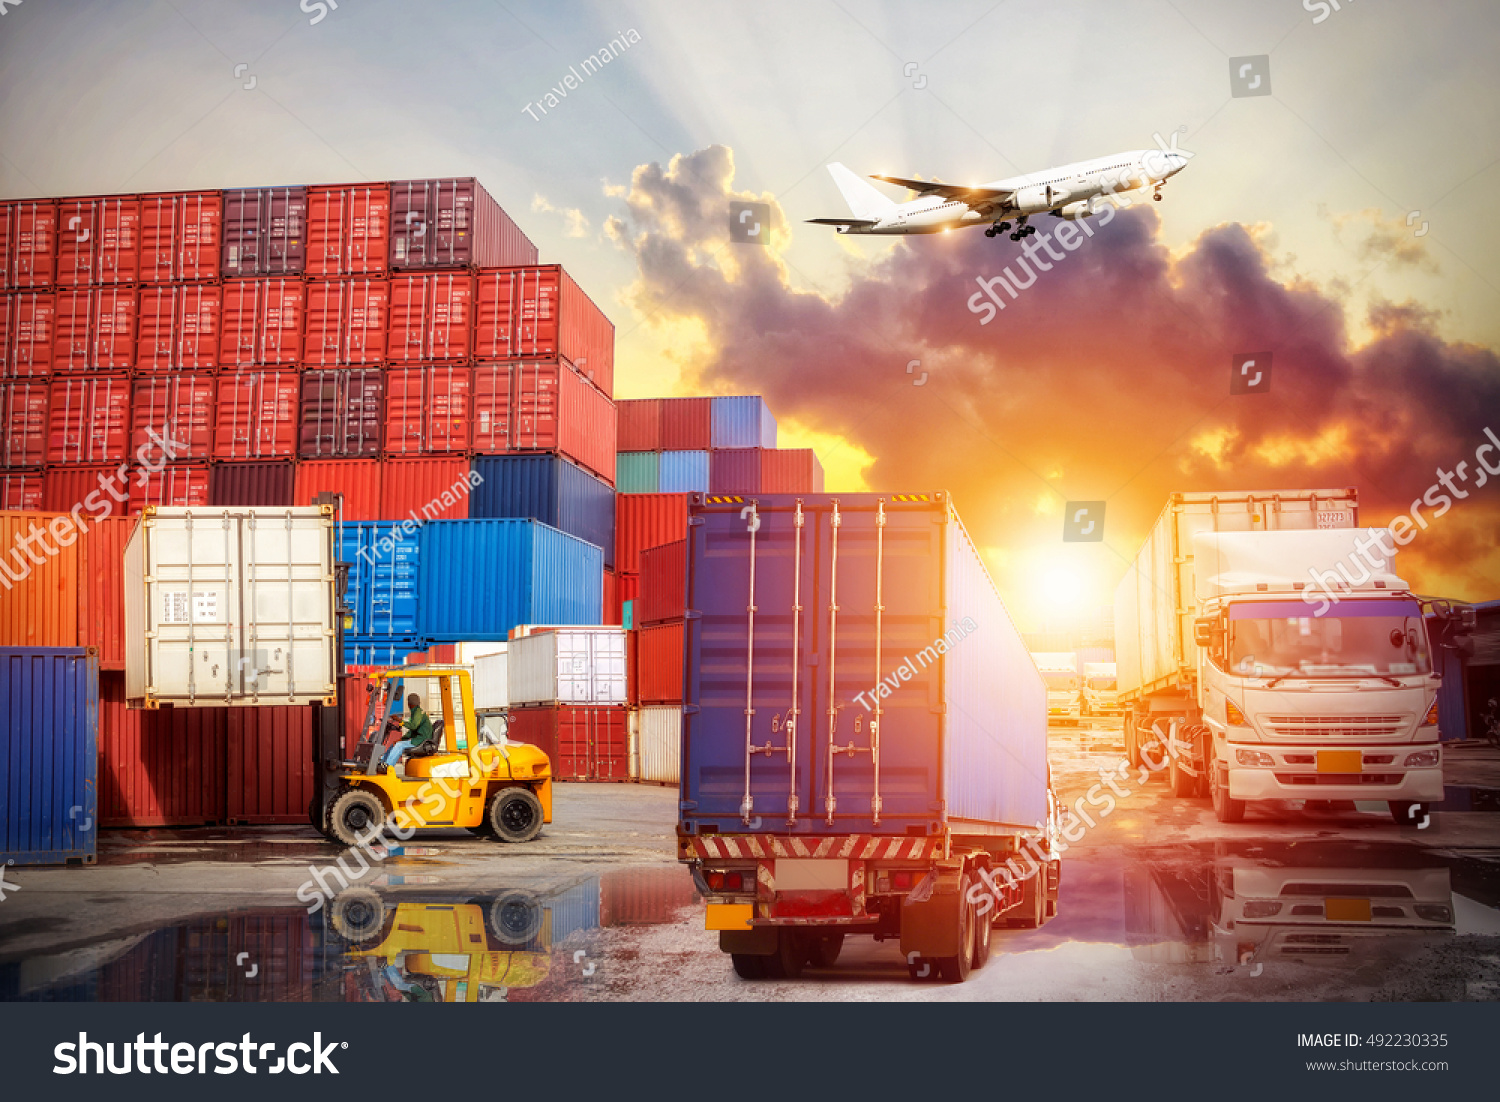 Industrial Container Cargo freight ship for Logistic Import Export concept #492230335